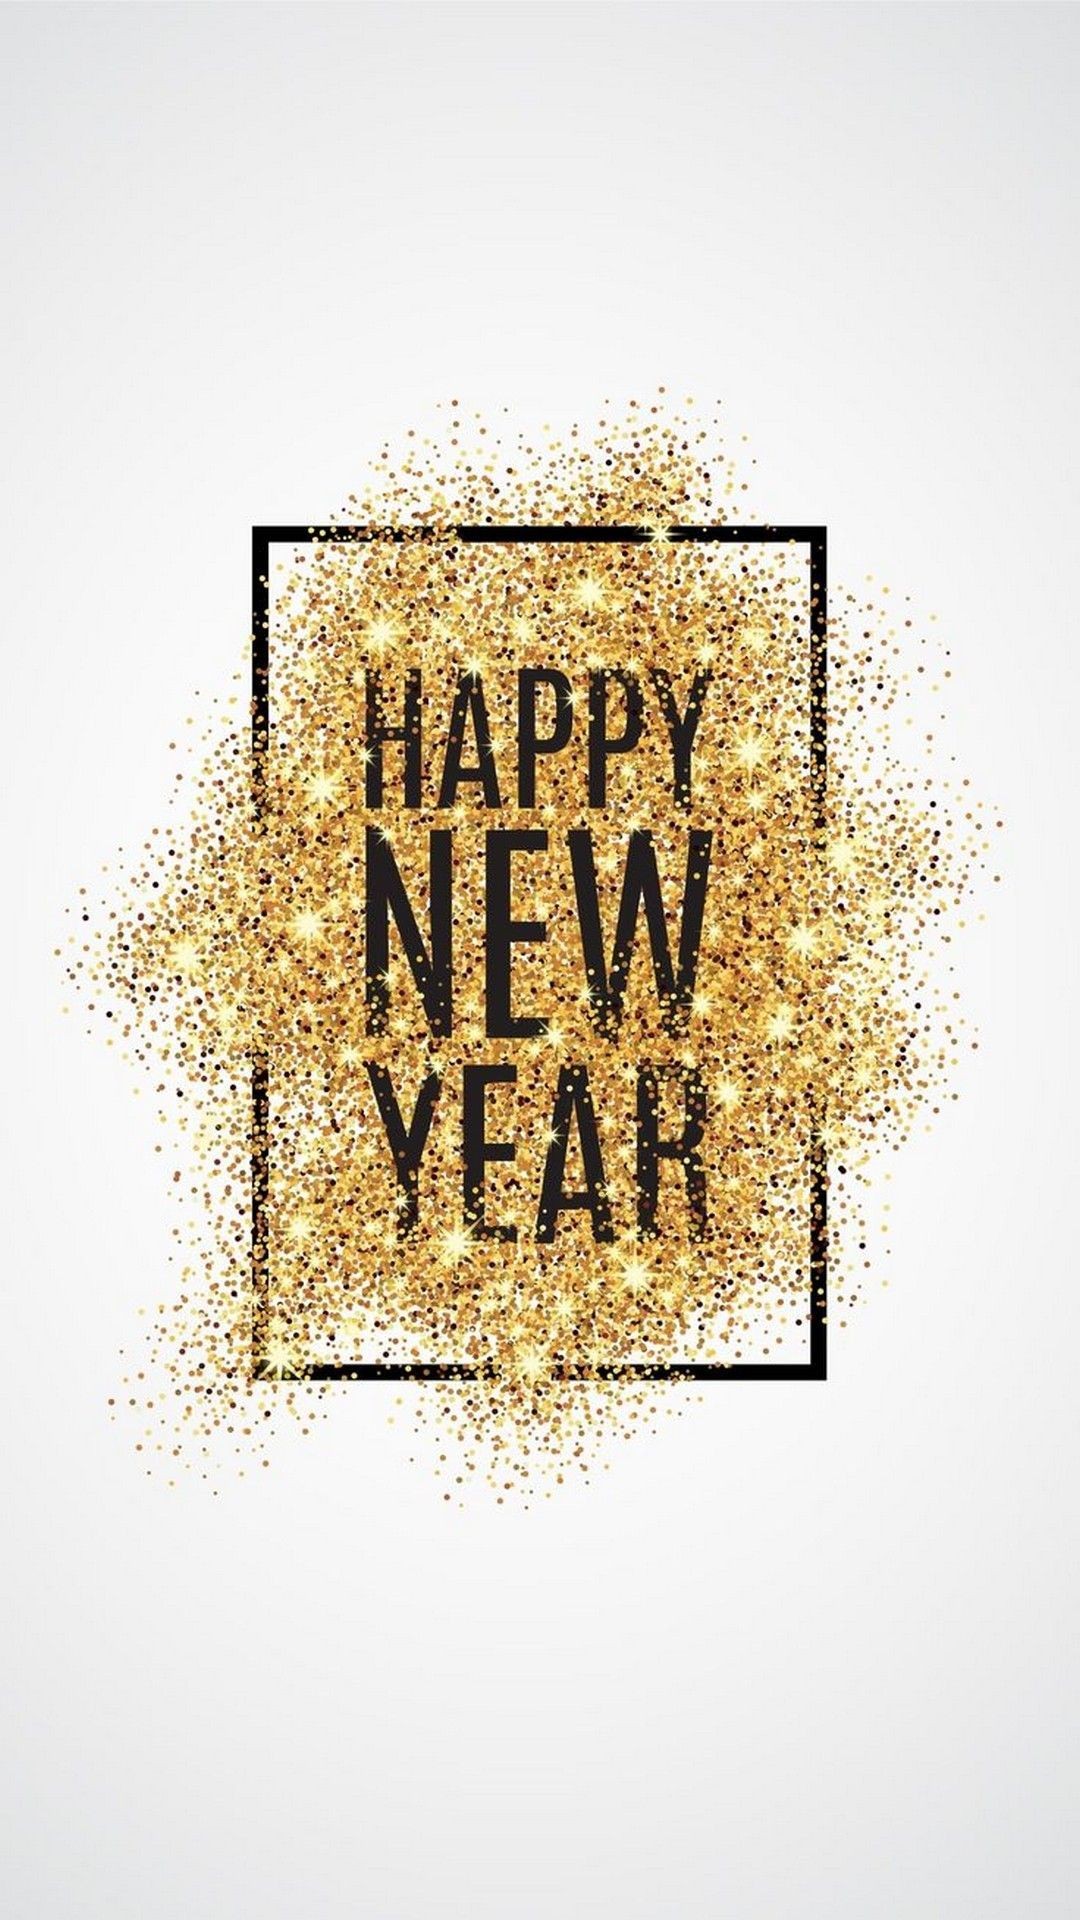 Happy New Year iPhone Wallpaper Tumblr with high-resolution 1080x1920 pixel. You can set as wallpaper for Apple iPhone X, XS Max, XR, 8, 7, 6, SE, iPad. Enjoy and share your favorite HD wallpapers and background images